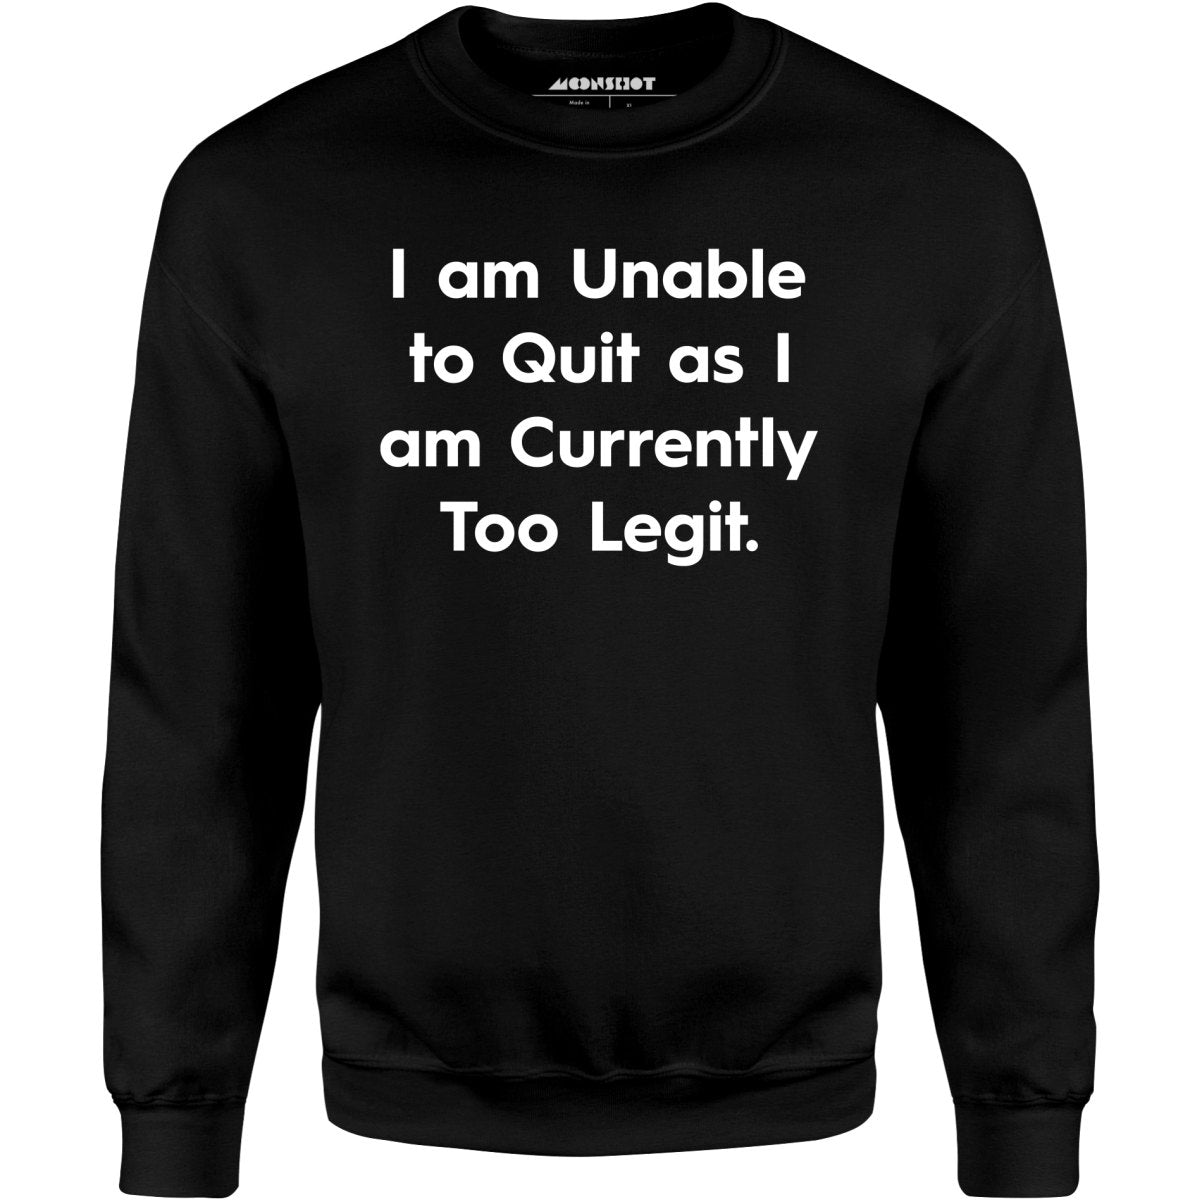 I am Unable to Quit as I am Currently Too Legit - Unisex Sweatshirt